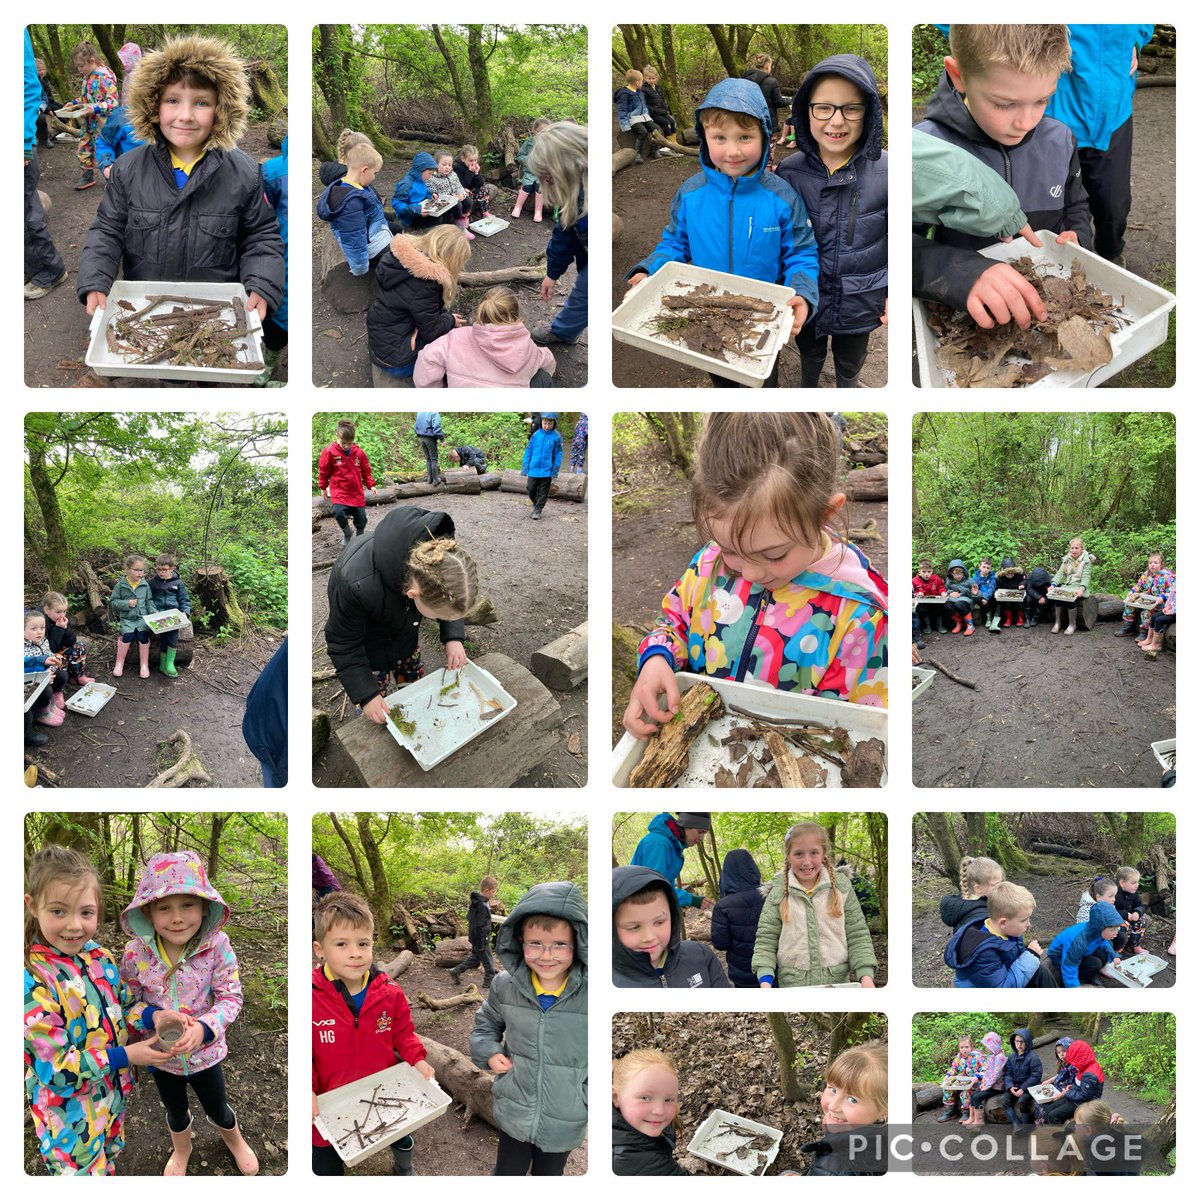 Mrs Maguire @TaniaWebb8 @cwmffrwdoer @RSPBNewport We had such a fantastic trip to Newport Wetlands today and the children really enjoyed the pond dipping and minibeast hunting 🪳🪲🦆🪶🌎🌿